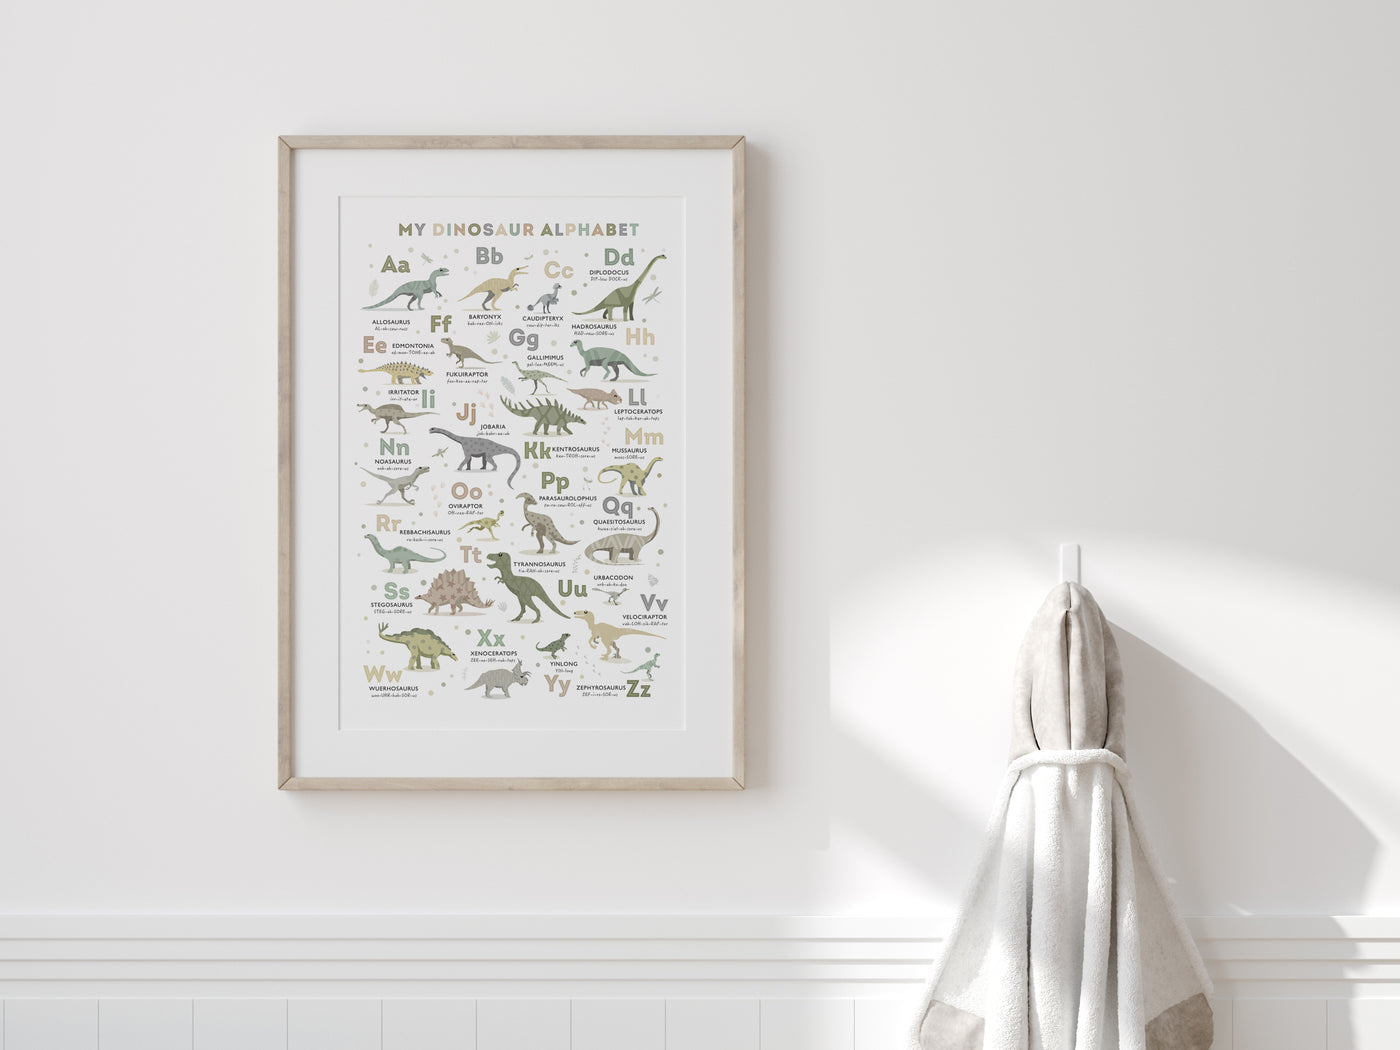 Dinosaur Alphabet Poster in Earth Tone Colours framed on a white wall with a neutral dressgown hanging next to it